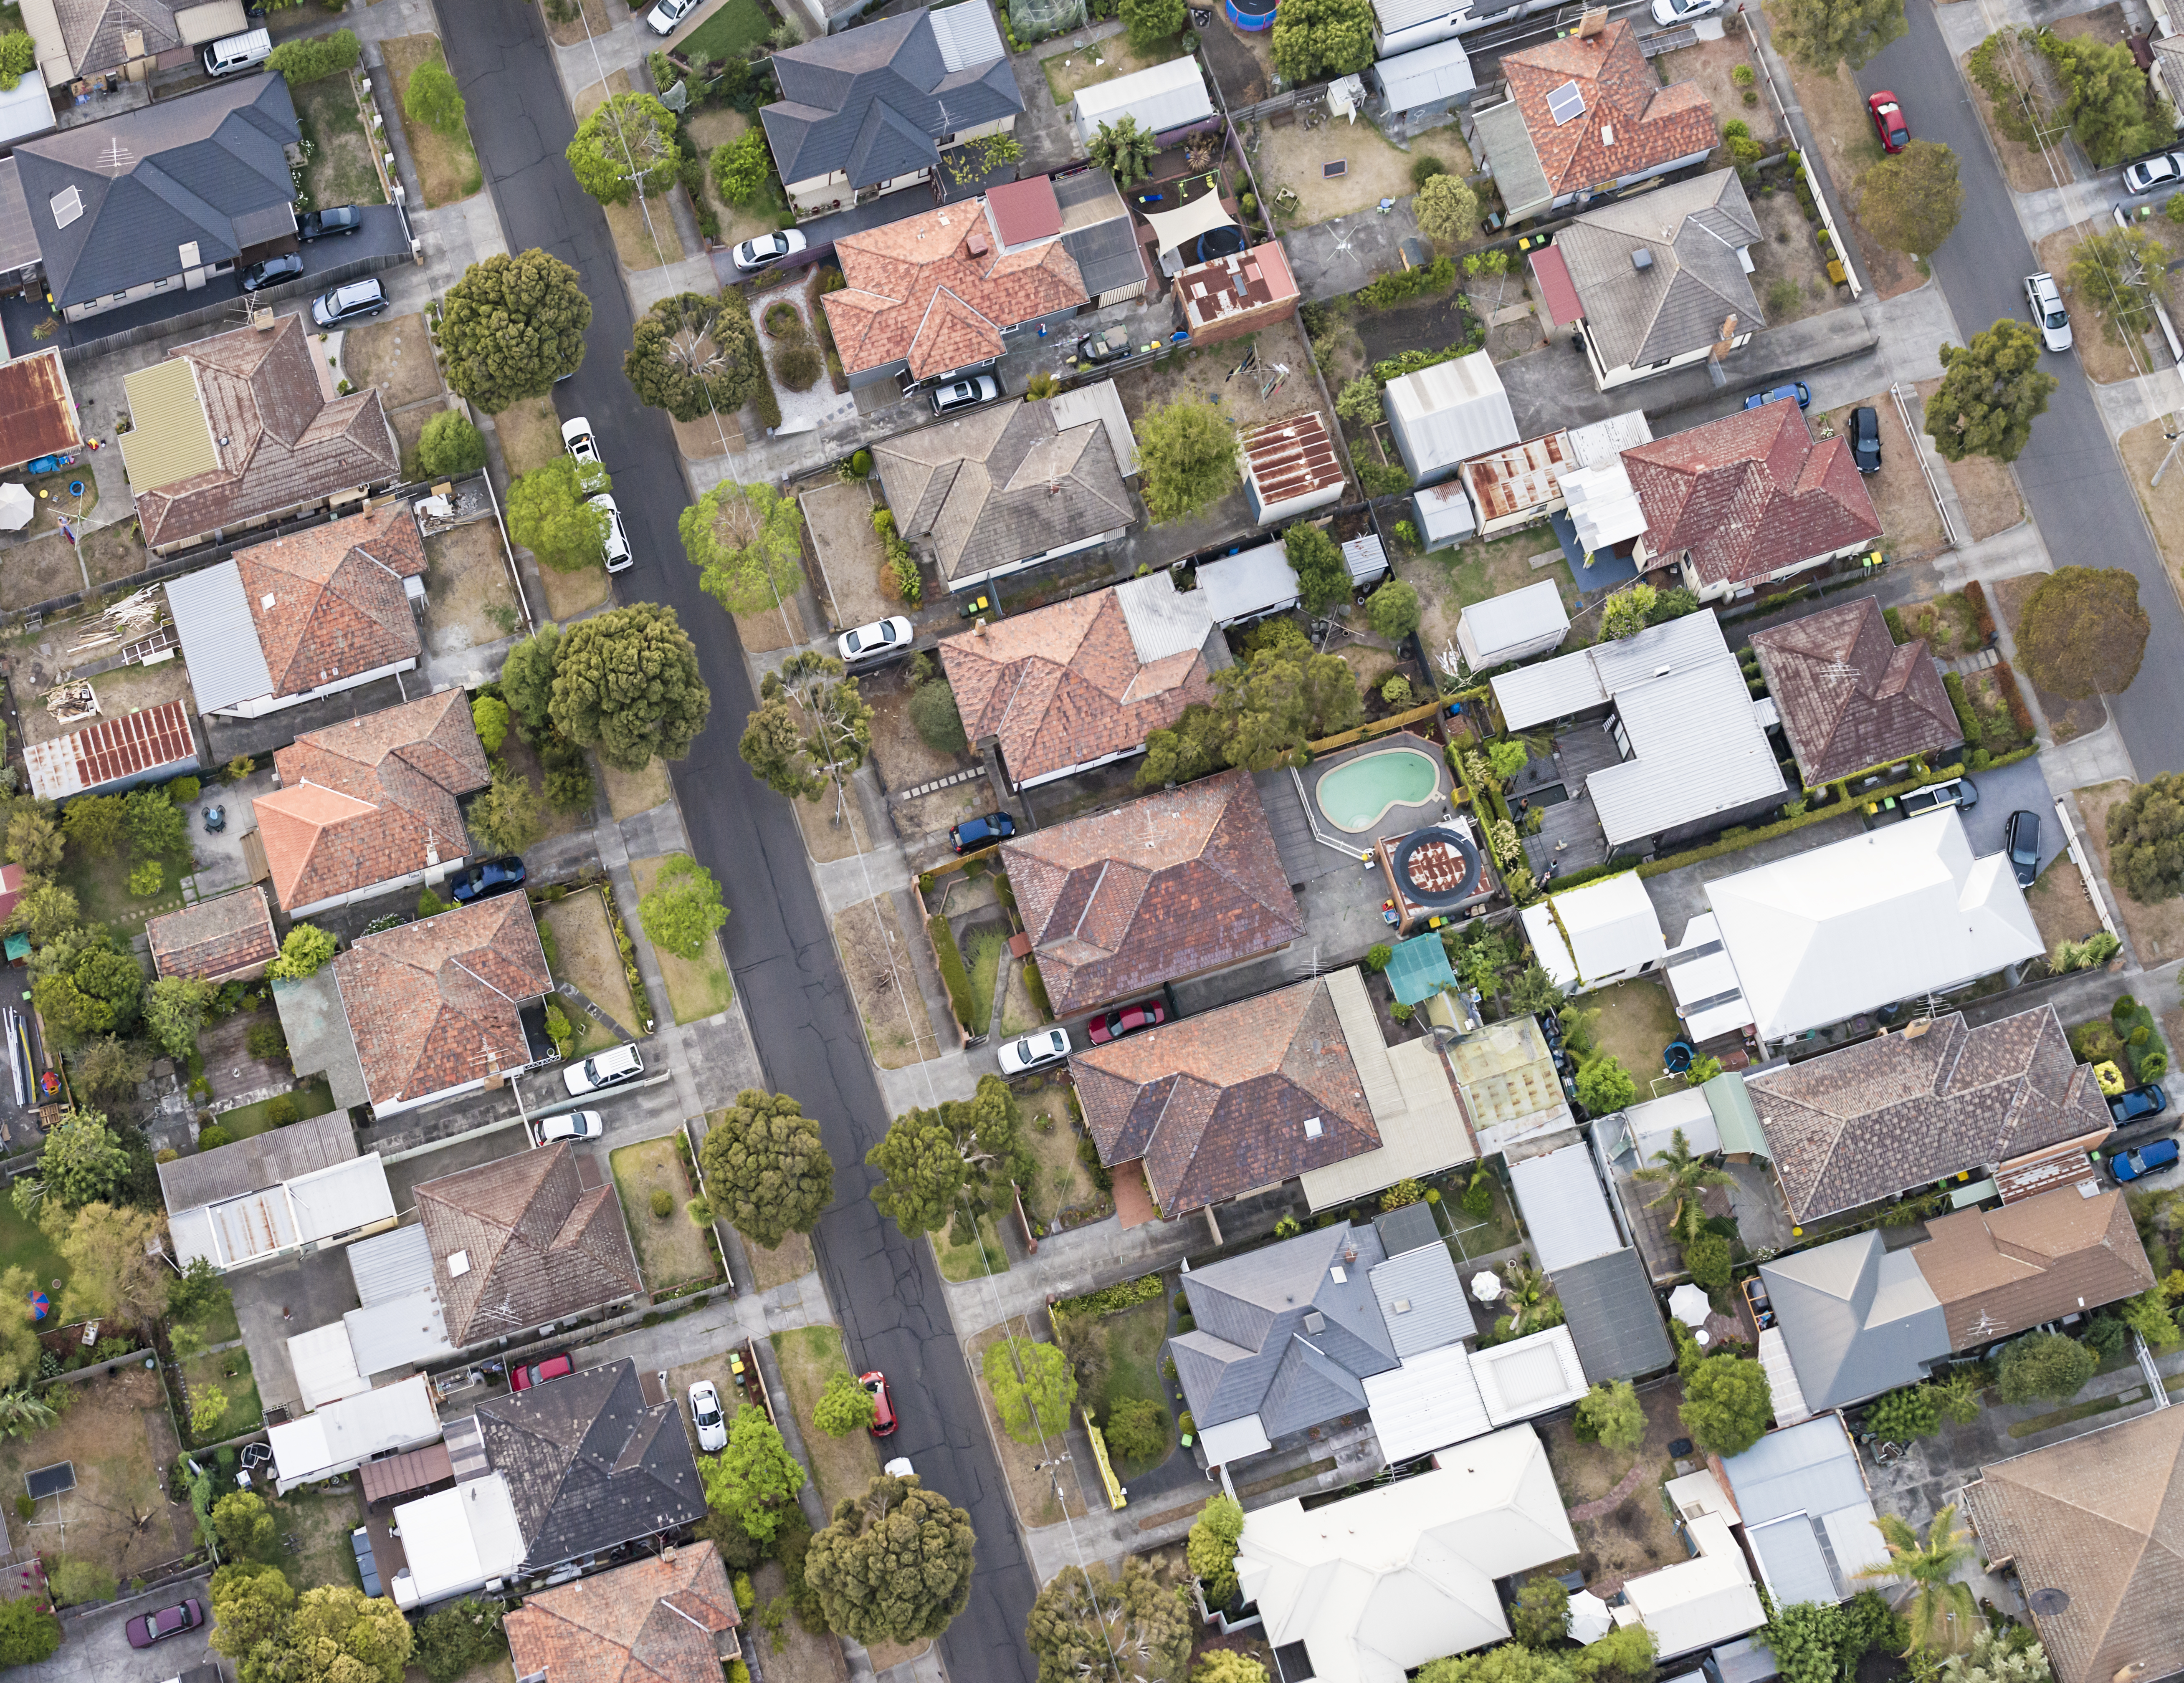 A view of suburban detached houses, gardens, streets and cars from directly above.